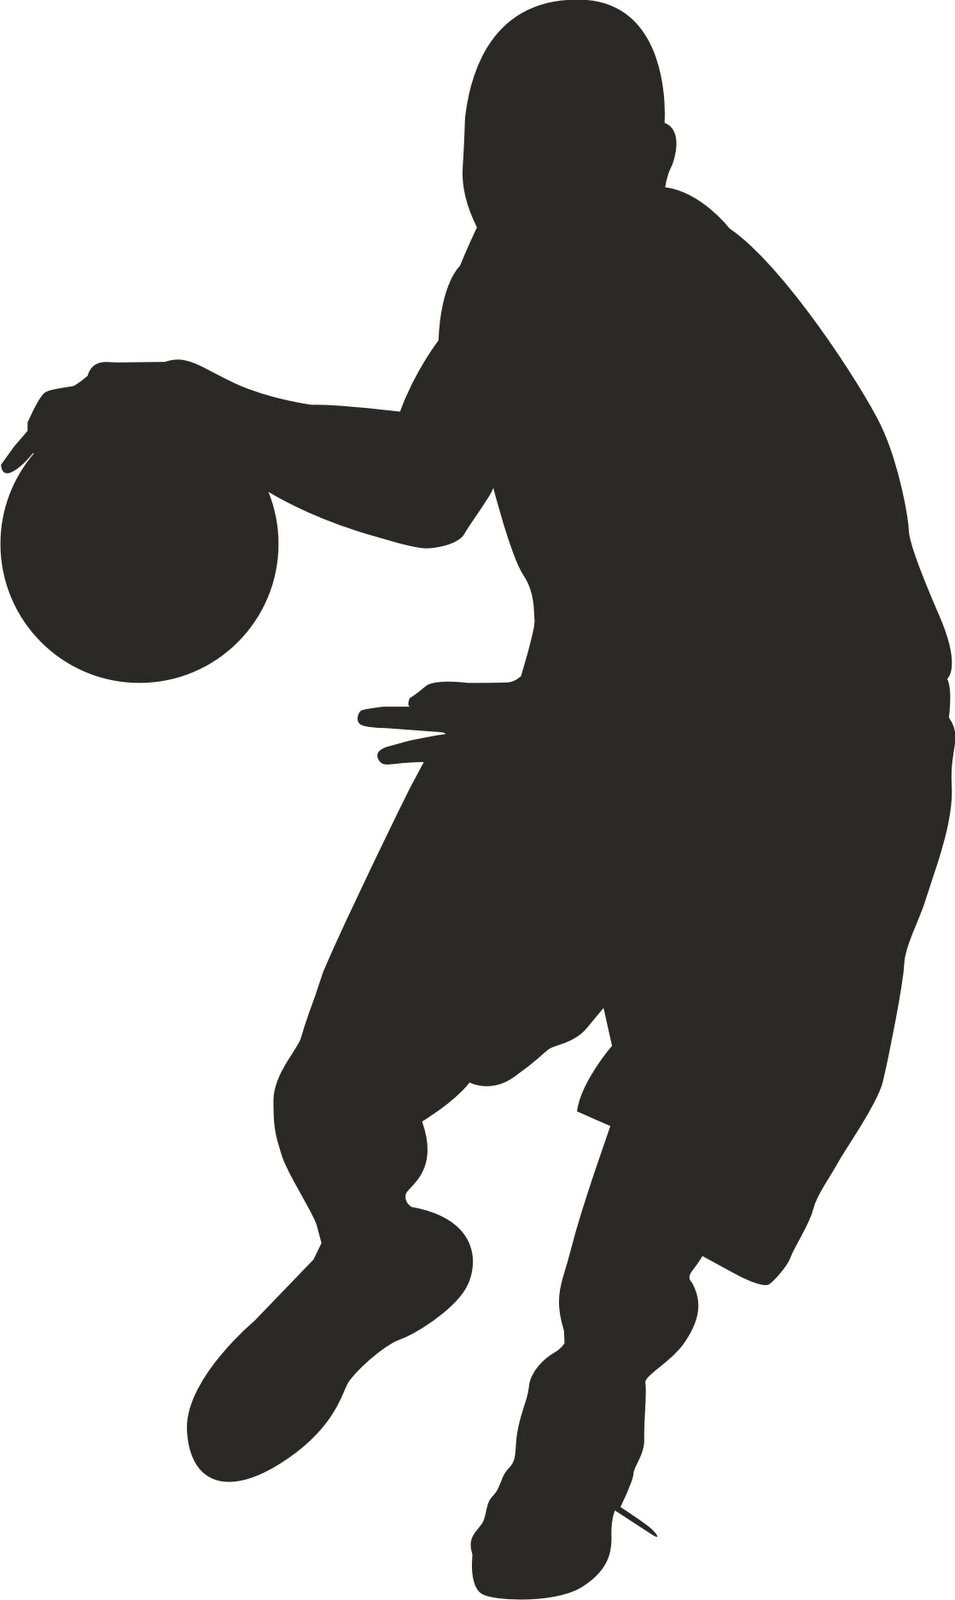 Girl basketball player clipart free images 6